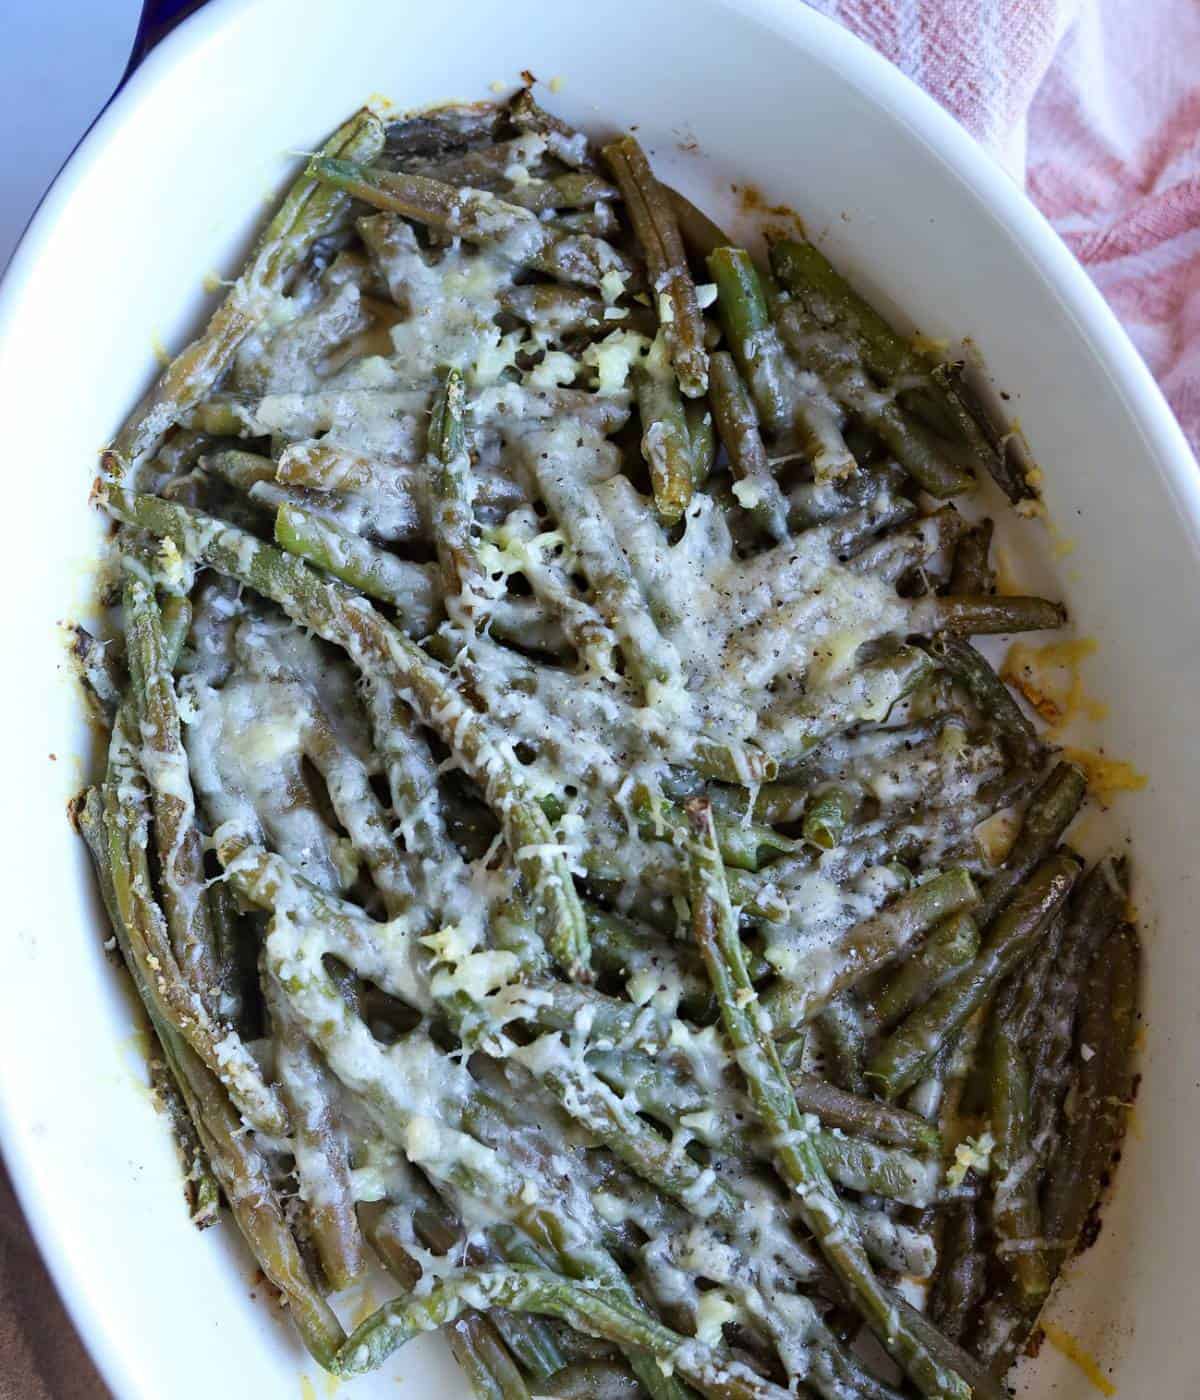 Parmesan covered green beans in casserole dish.